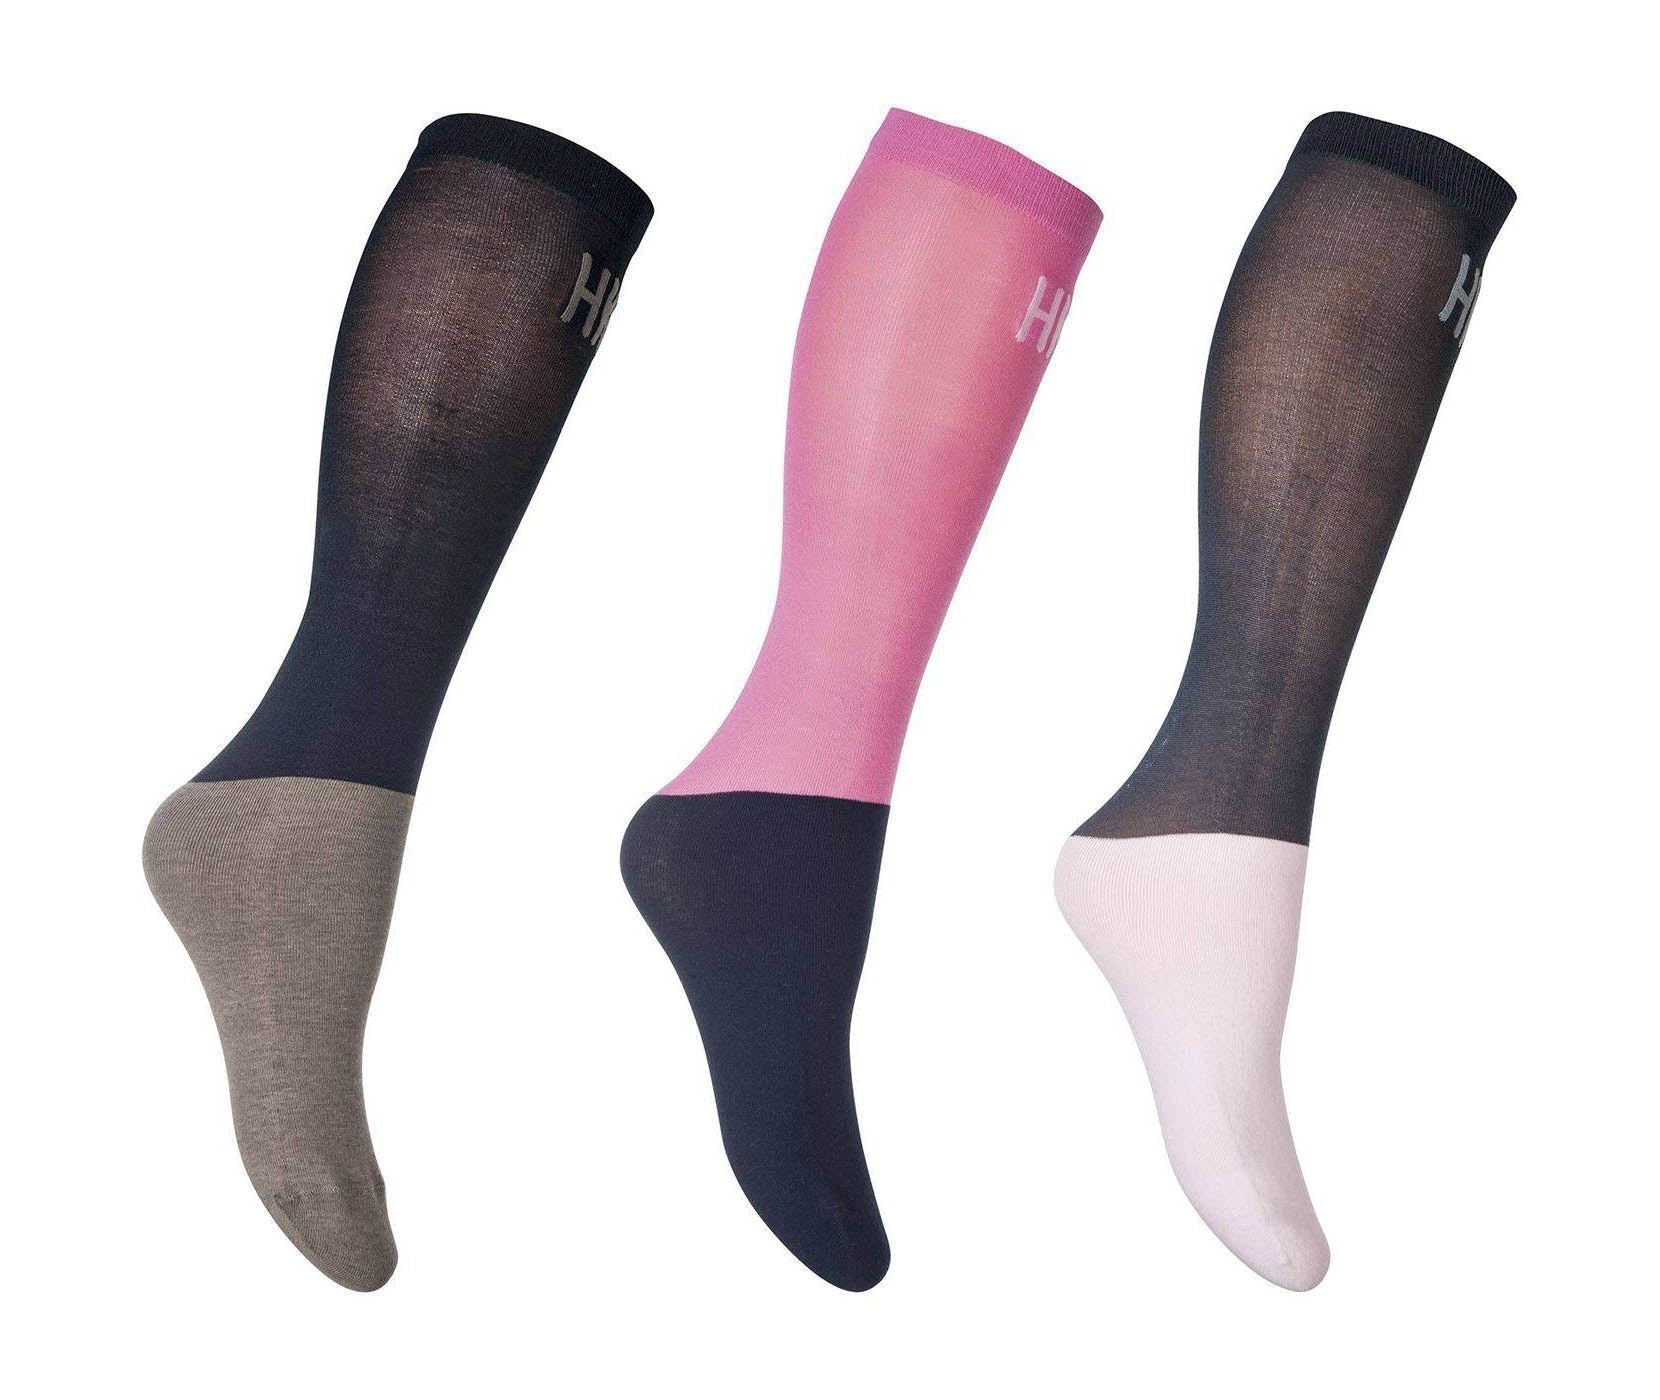 HKM Horse Riding Socks Microcotton Colour Set Of 3 - Just Horse Riders